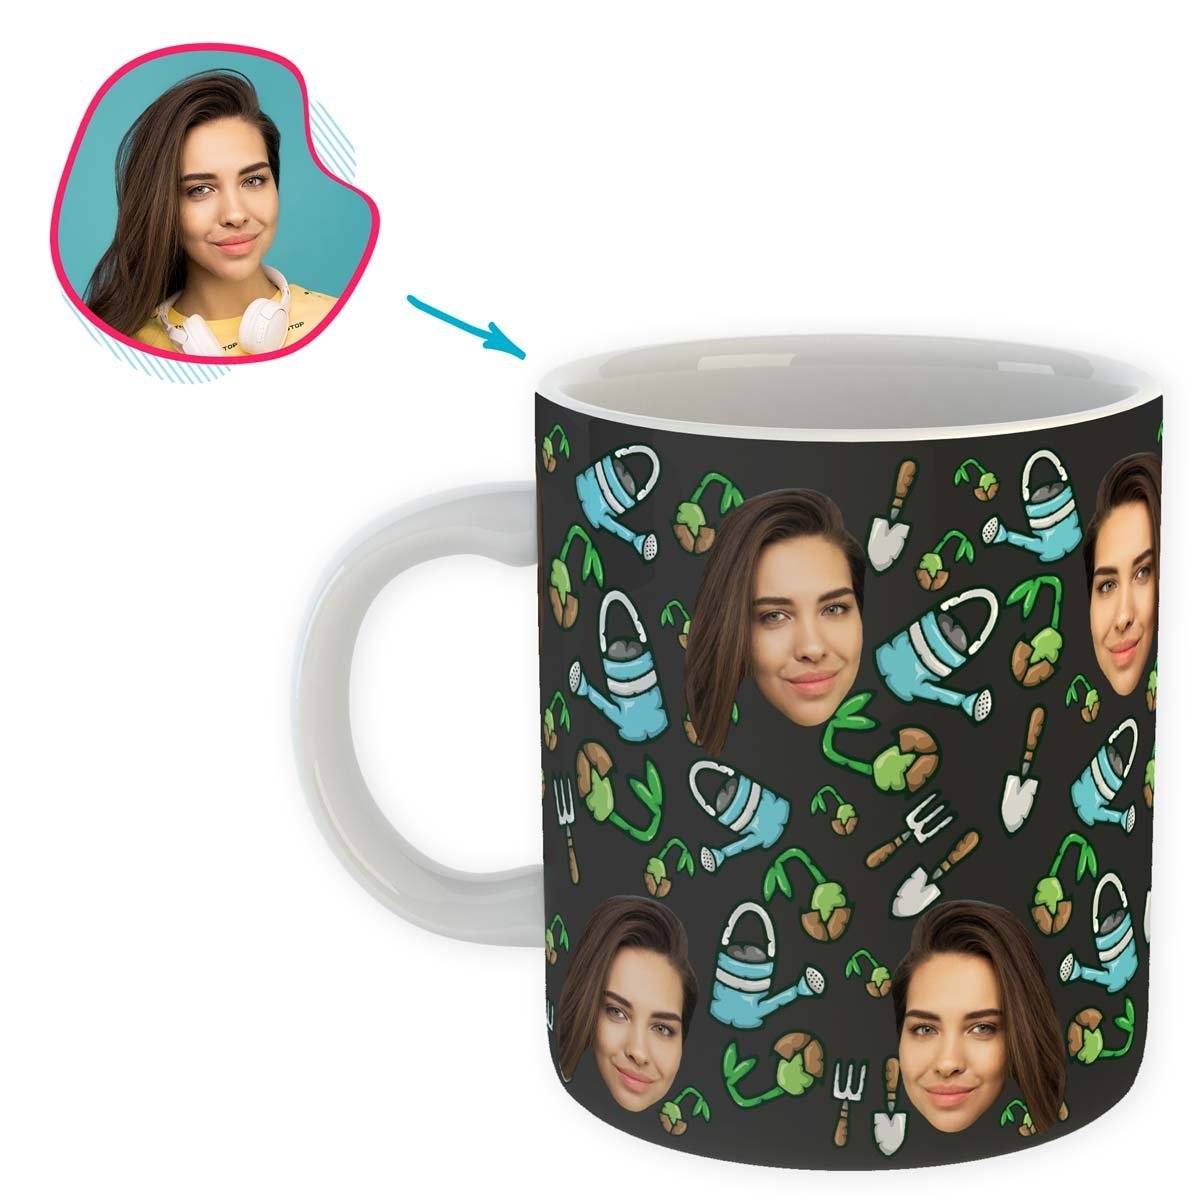 dark Gardening mug personalized with photo of face printed on it